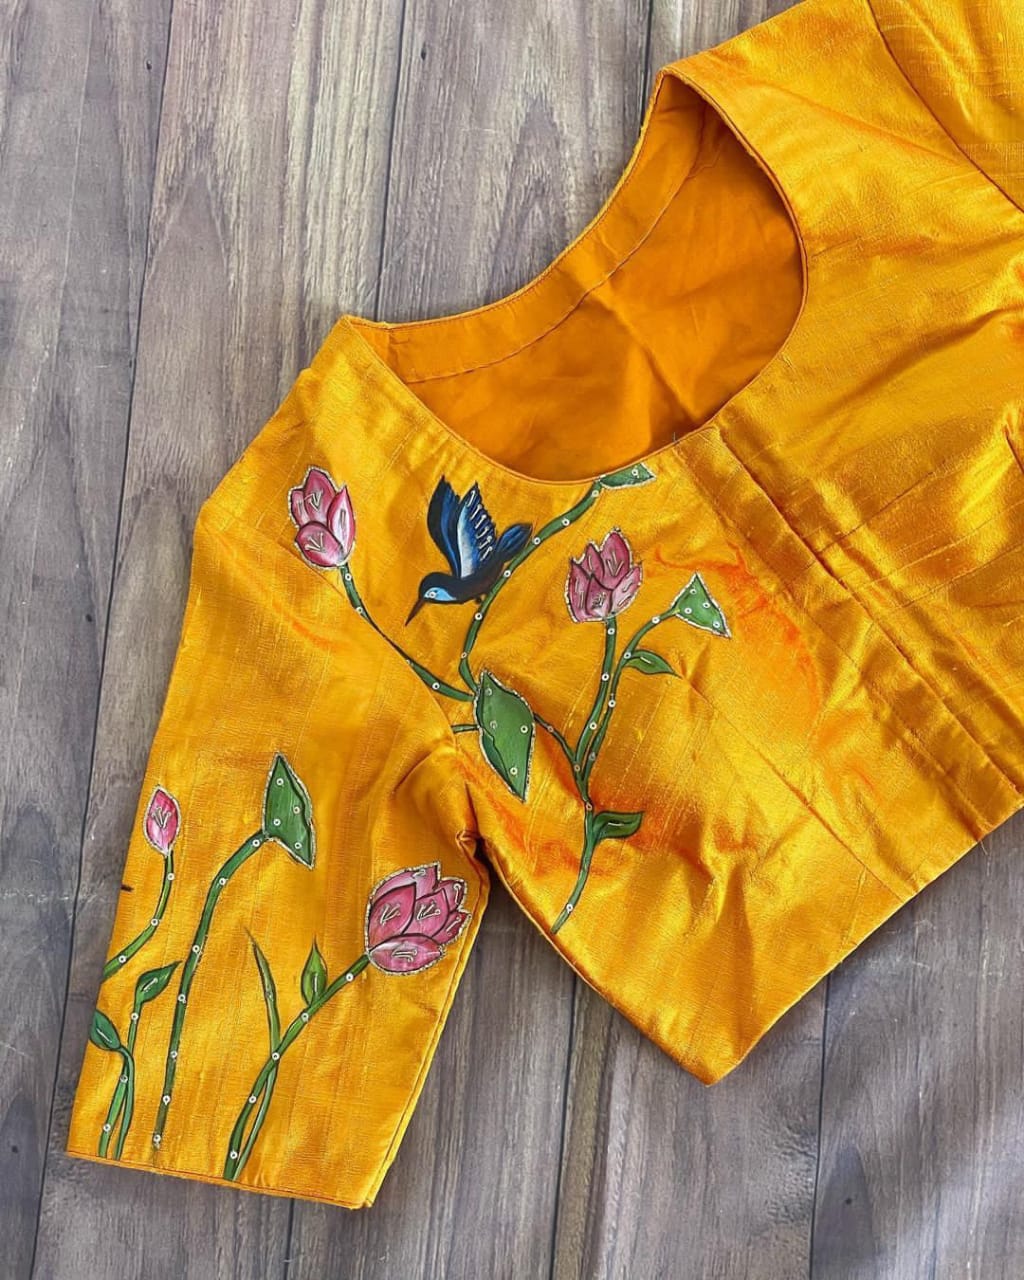 Blouse has print sequance , val and moti and handwork